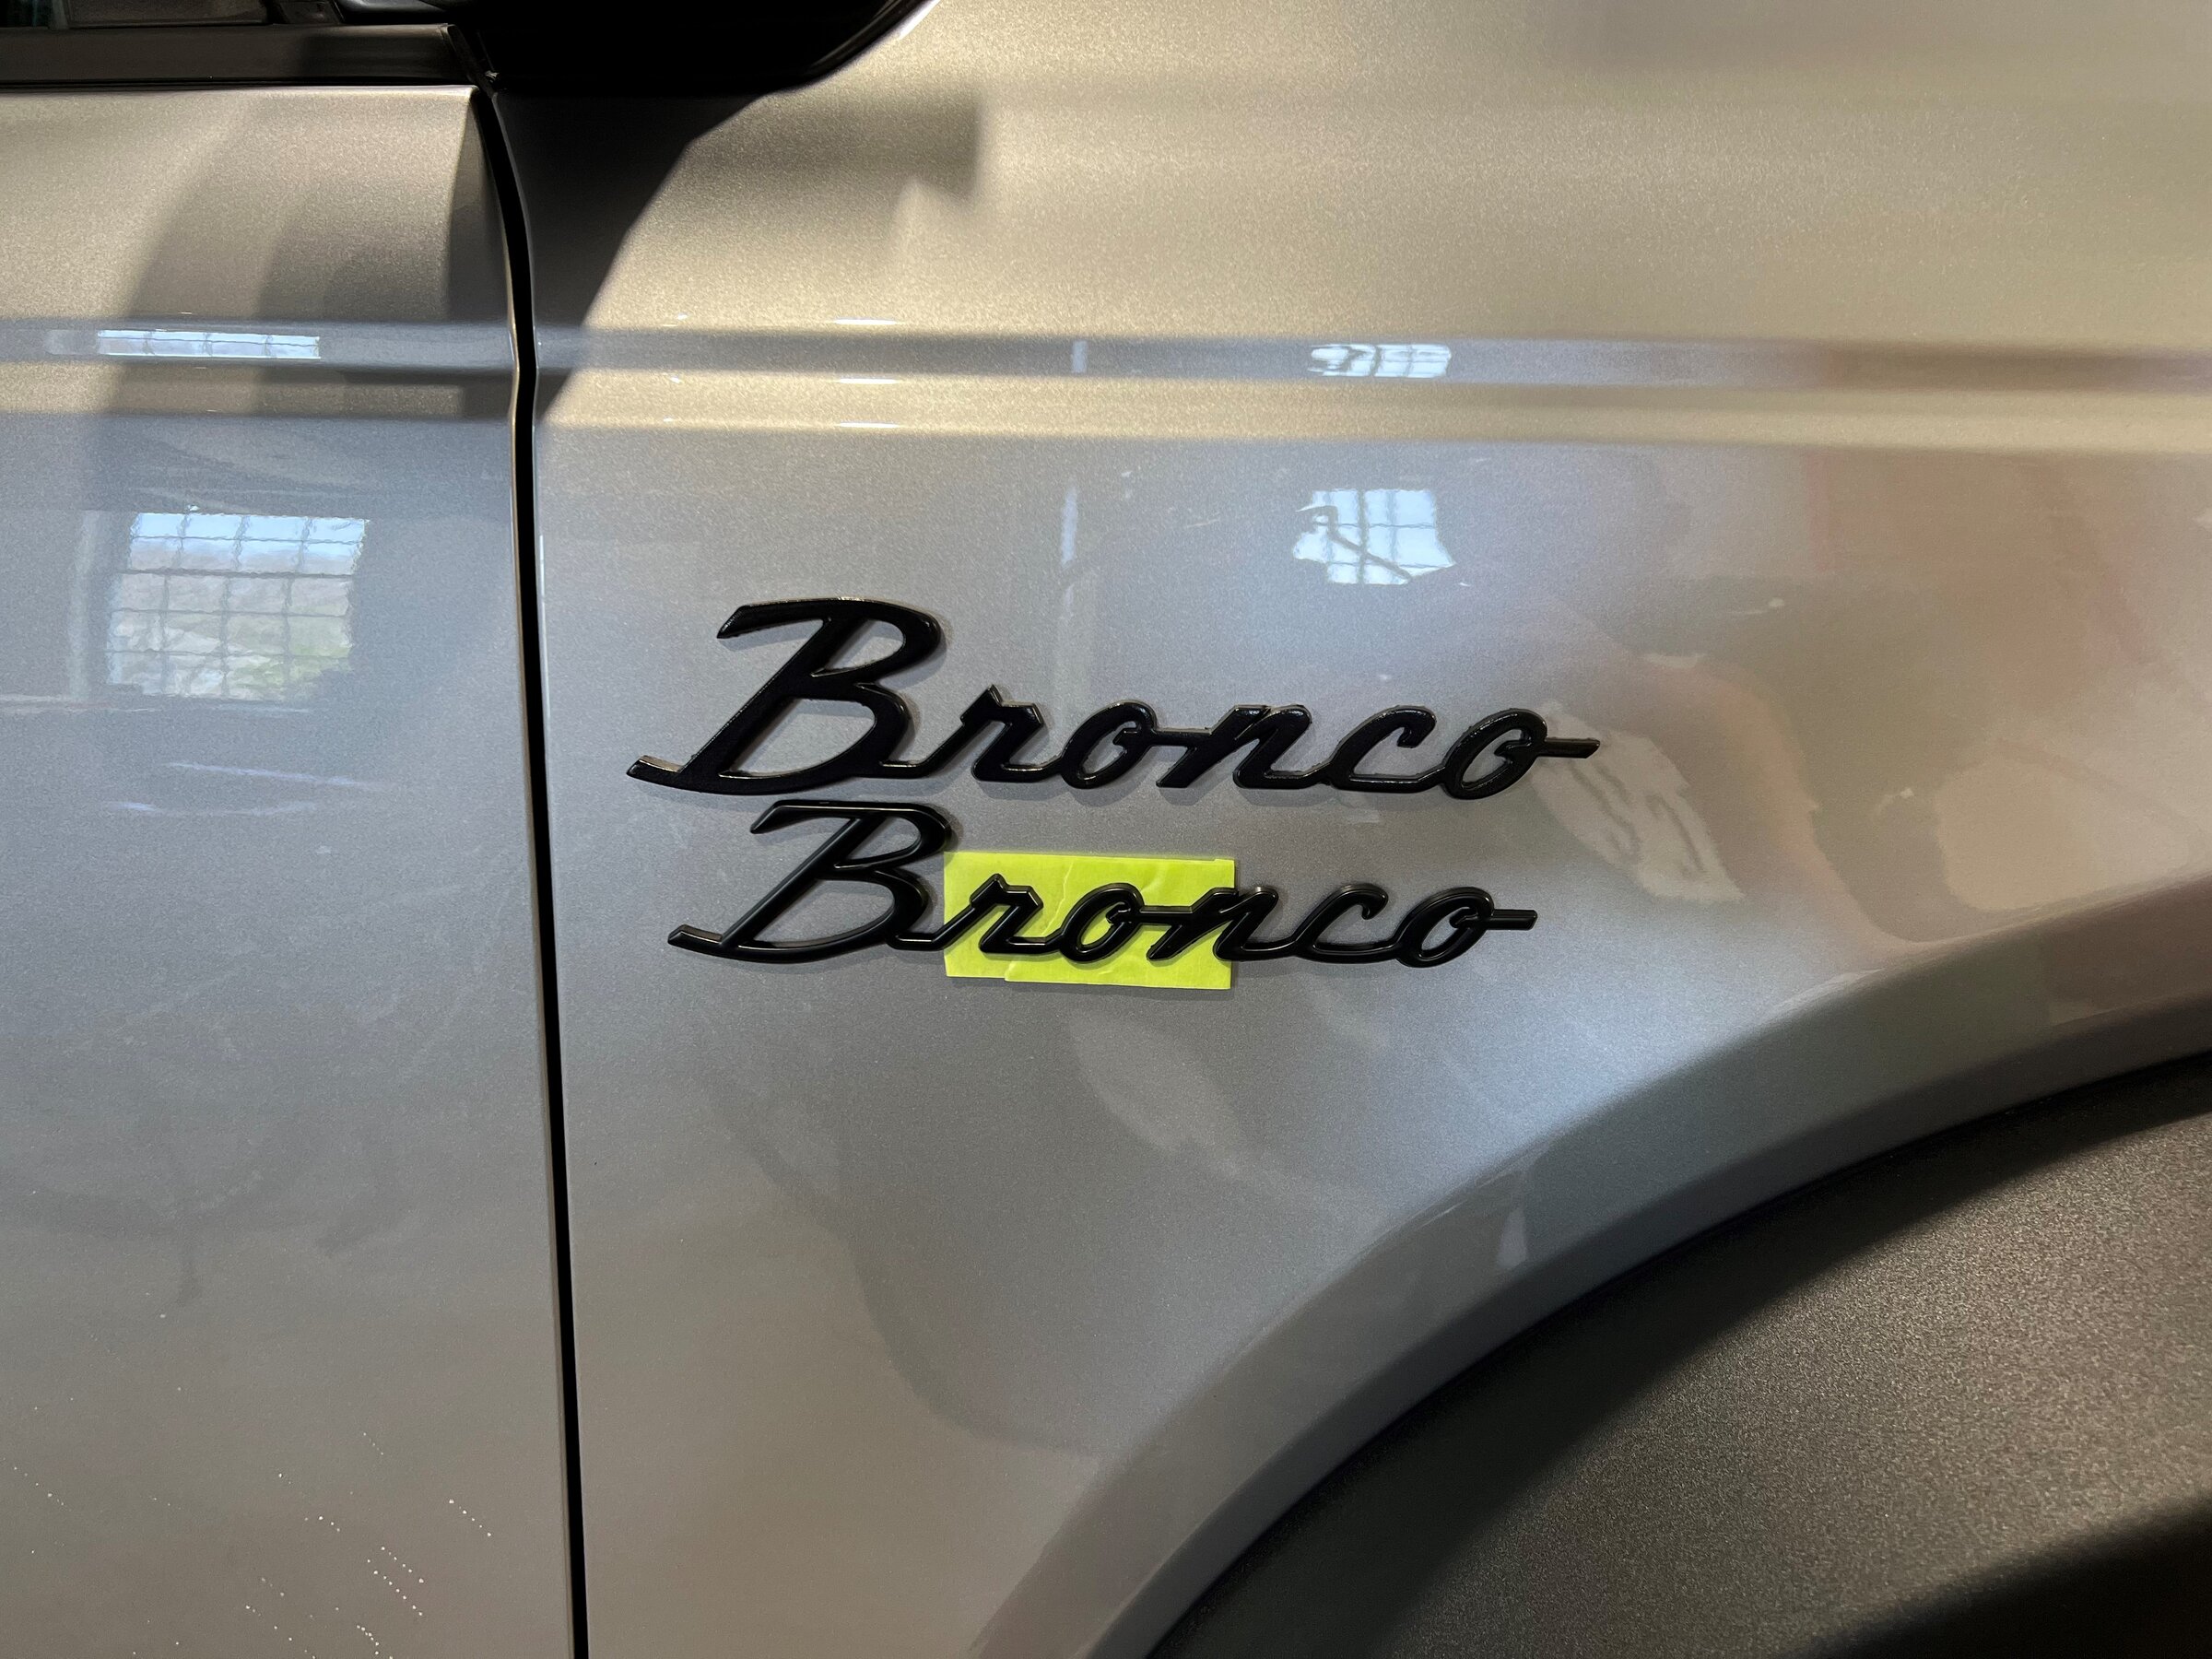 Ford Bronco Adhesive backed Heritage Bronco Fender Badges by BroncoDepotUSA [NO LONGER AVAILABLE] 1650305529756